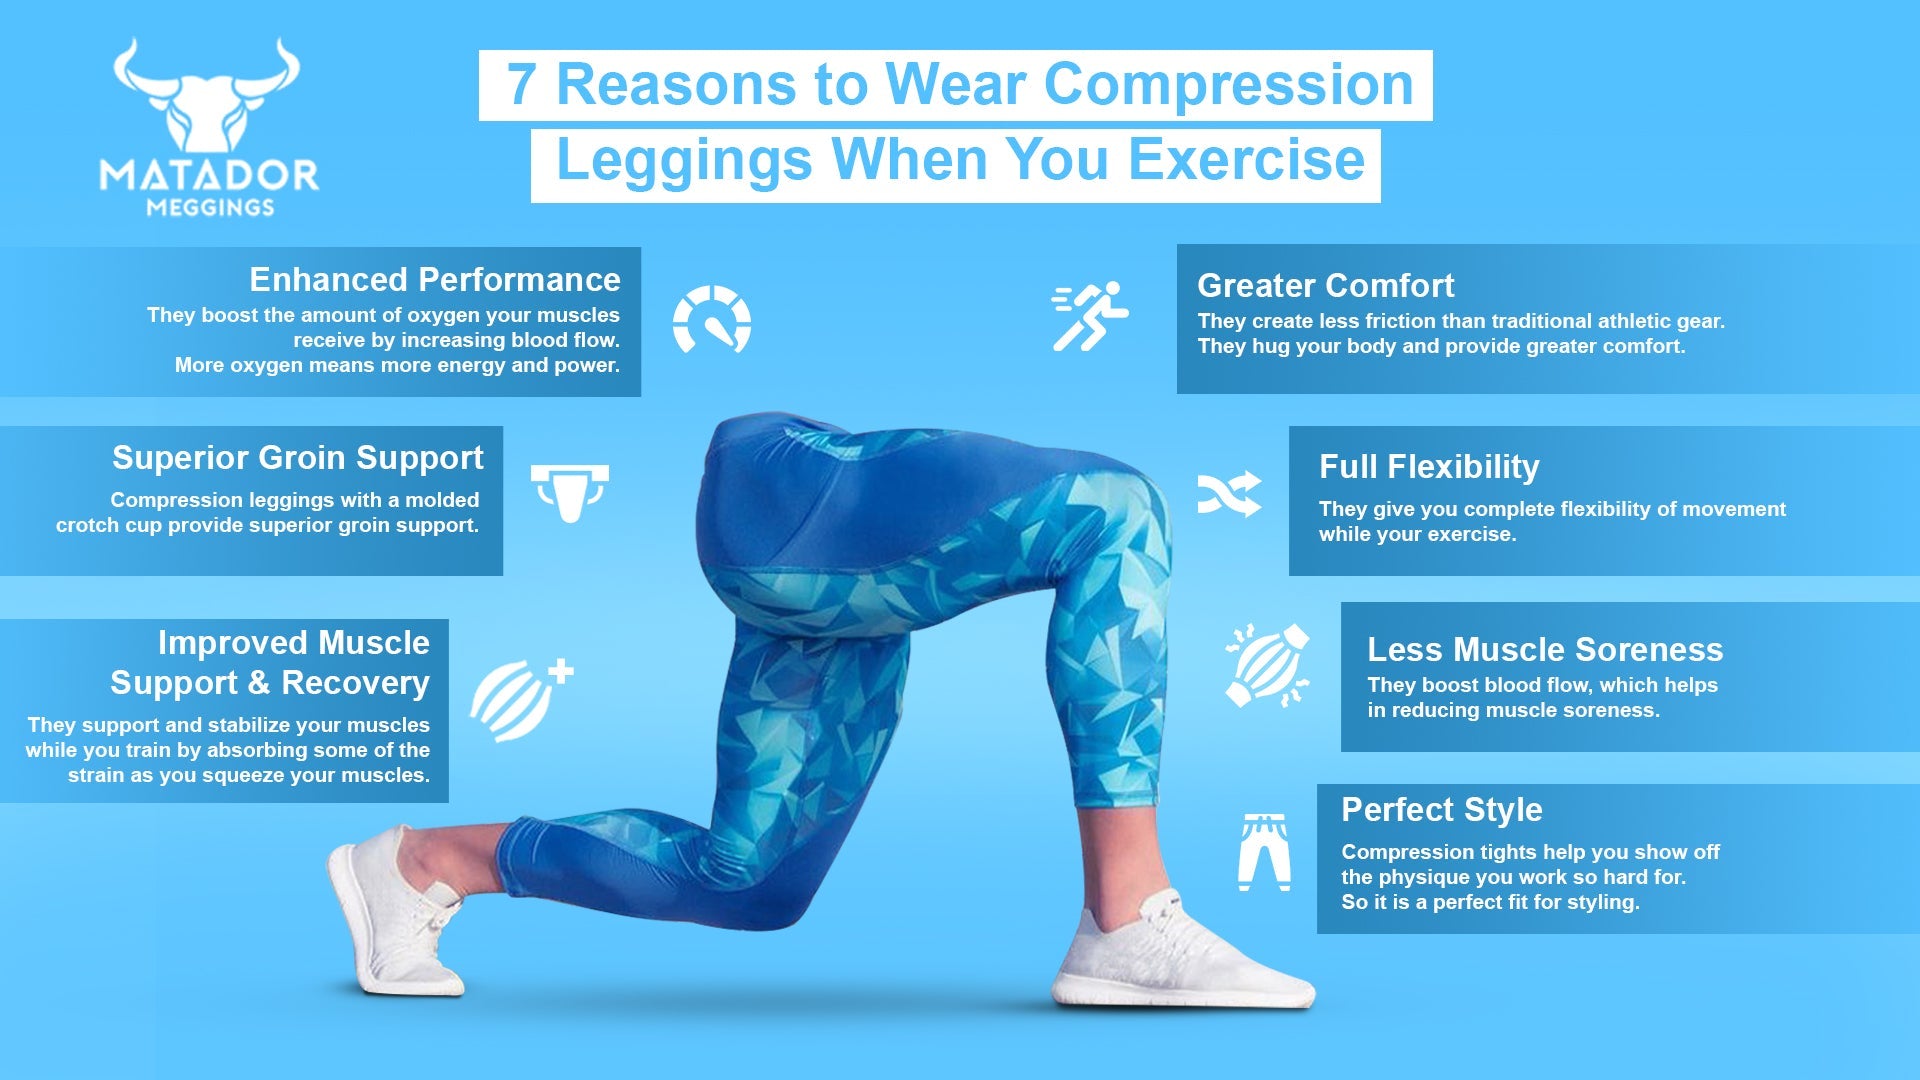 Are Compression Leggings Safe During Pregnancy? – solowomen